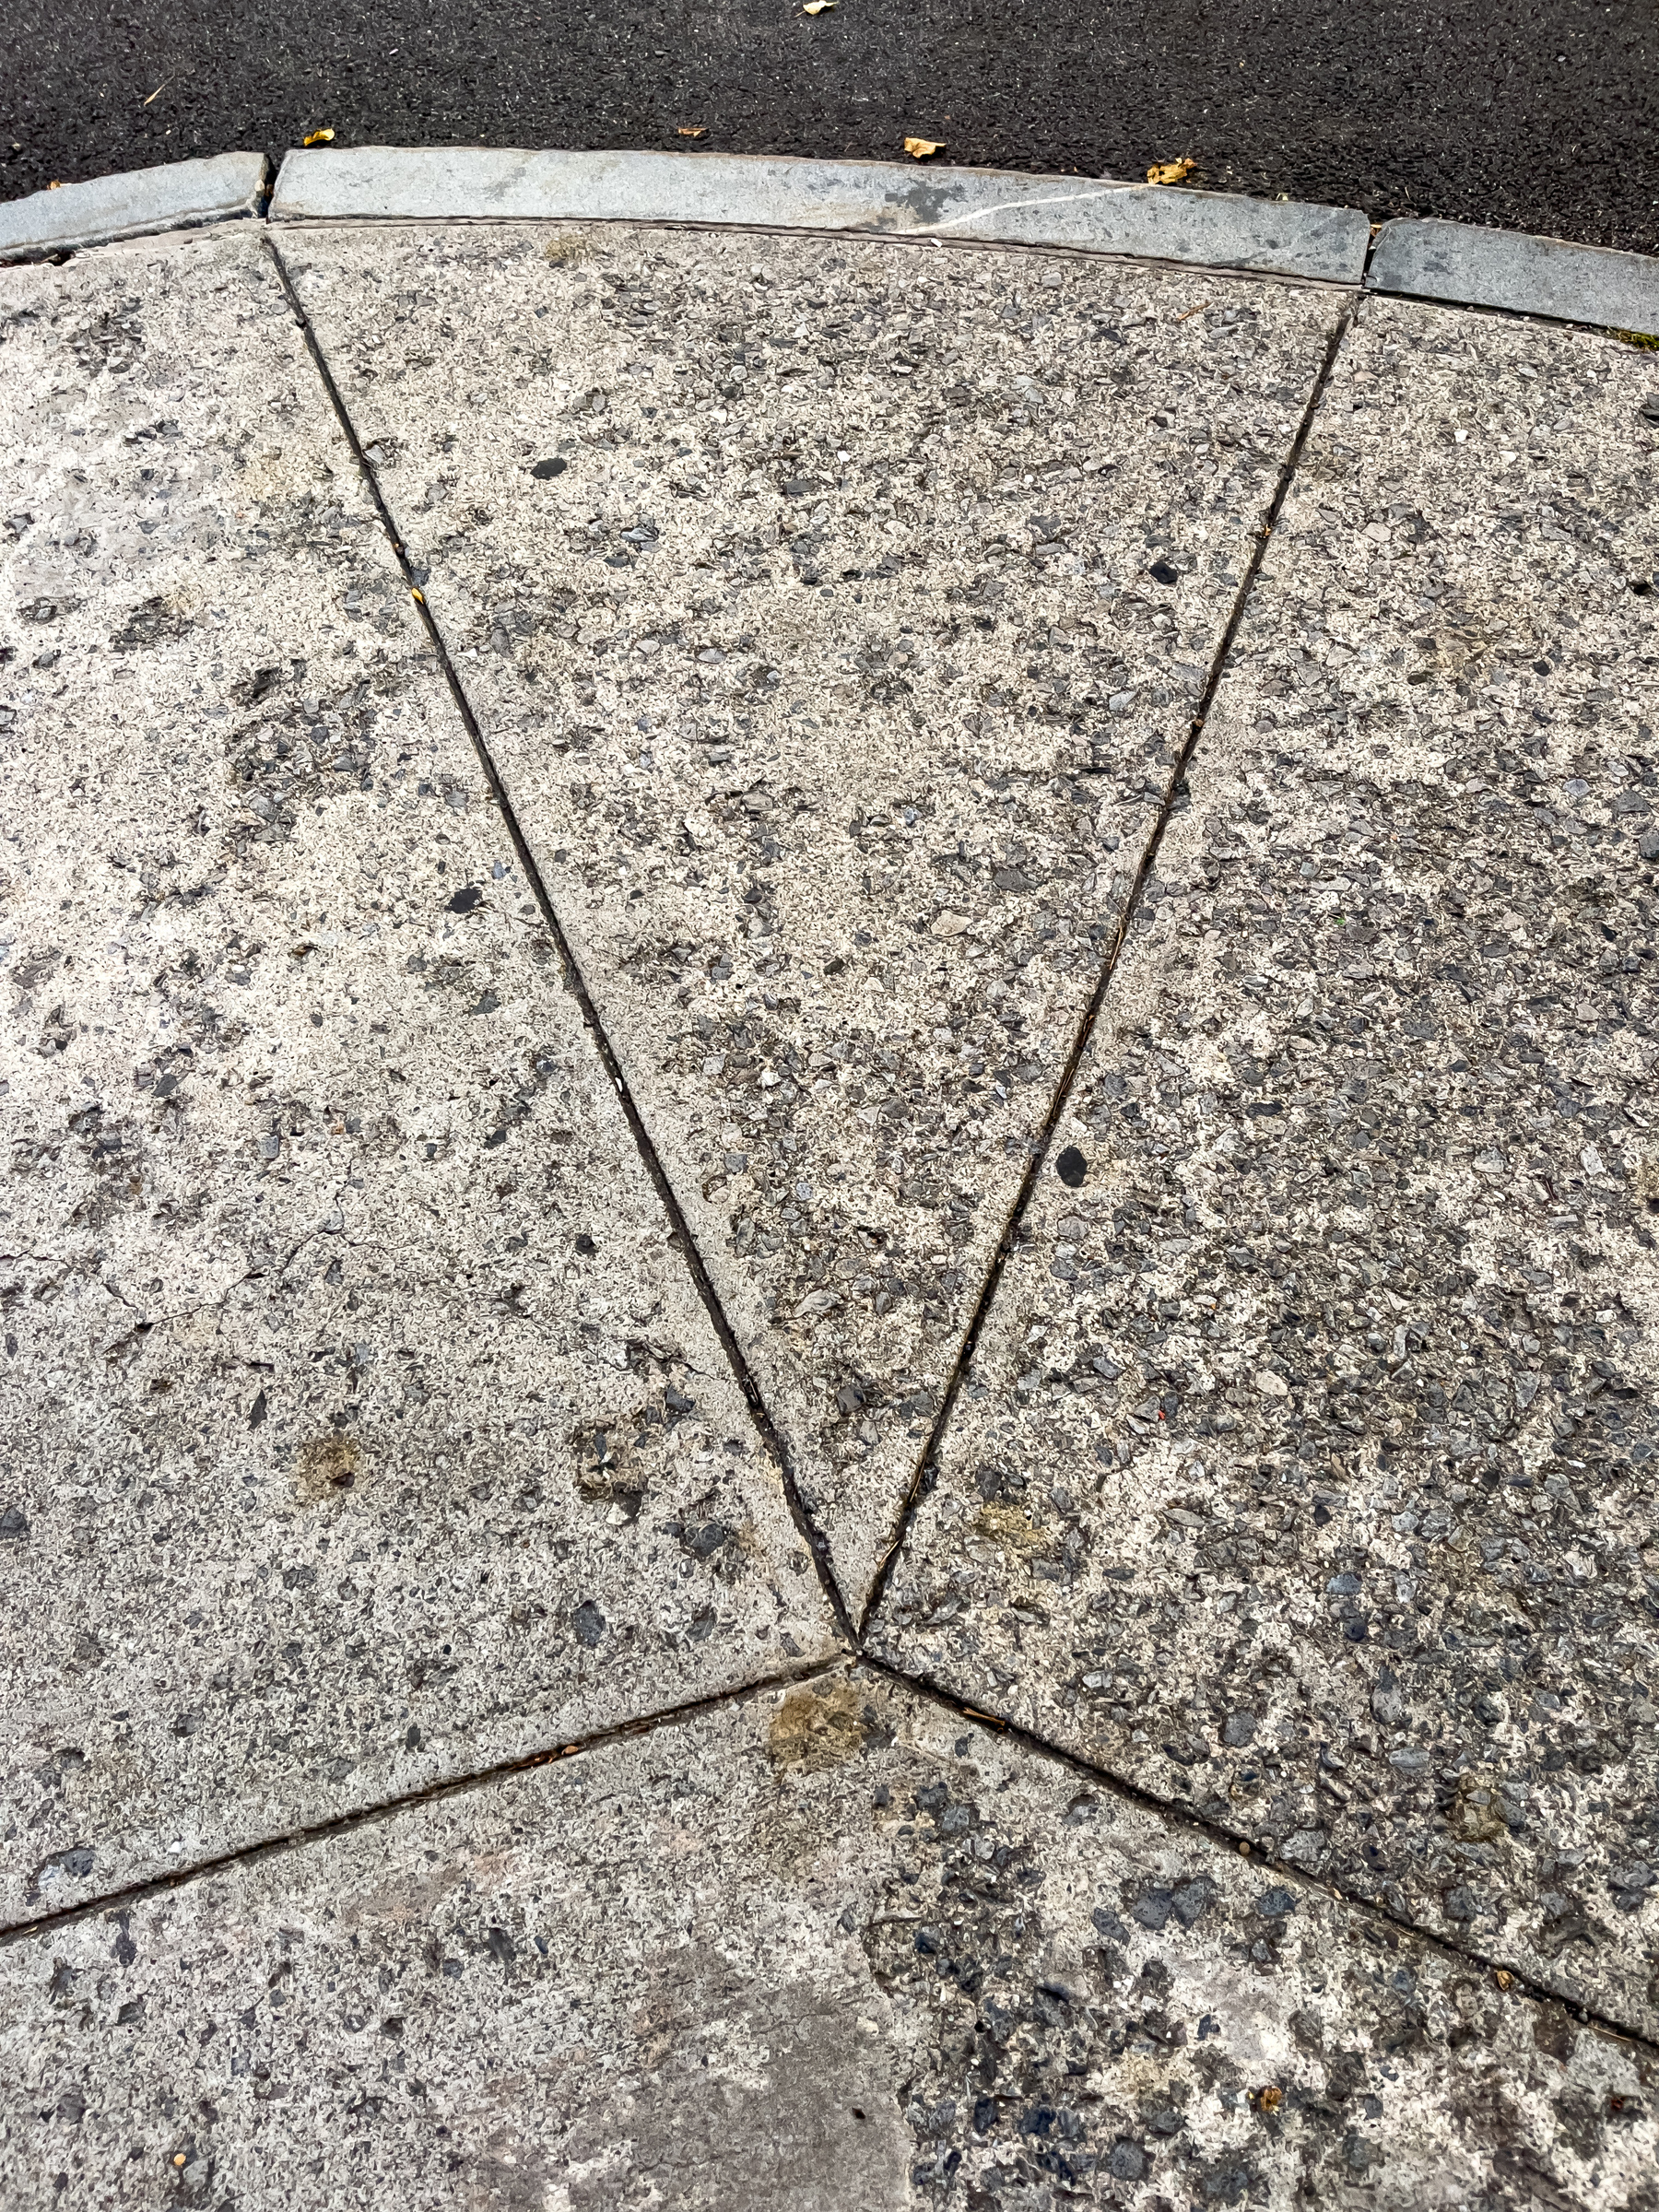 Concrete sidewalk with crack control lines forming a triangle in the middle.